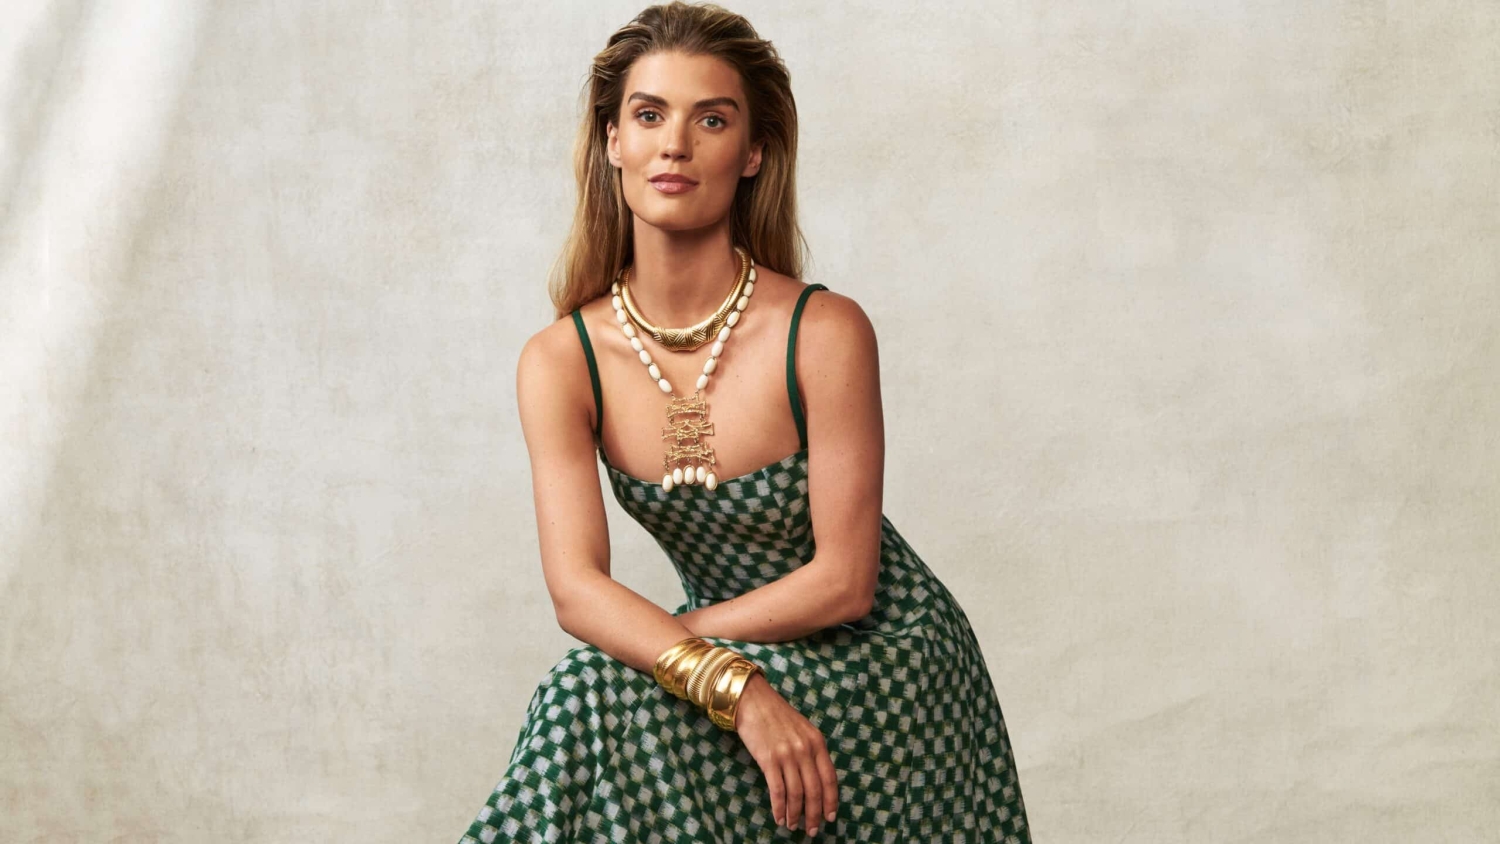 Agee Leinberry models a green and white checkered dress accessorized with gold jewelry.